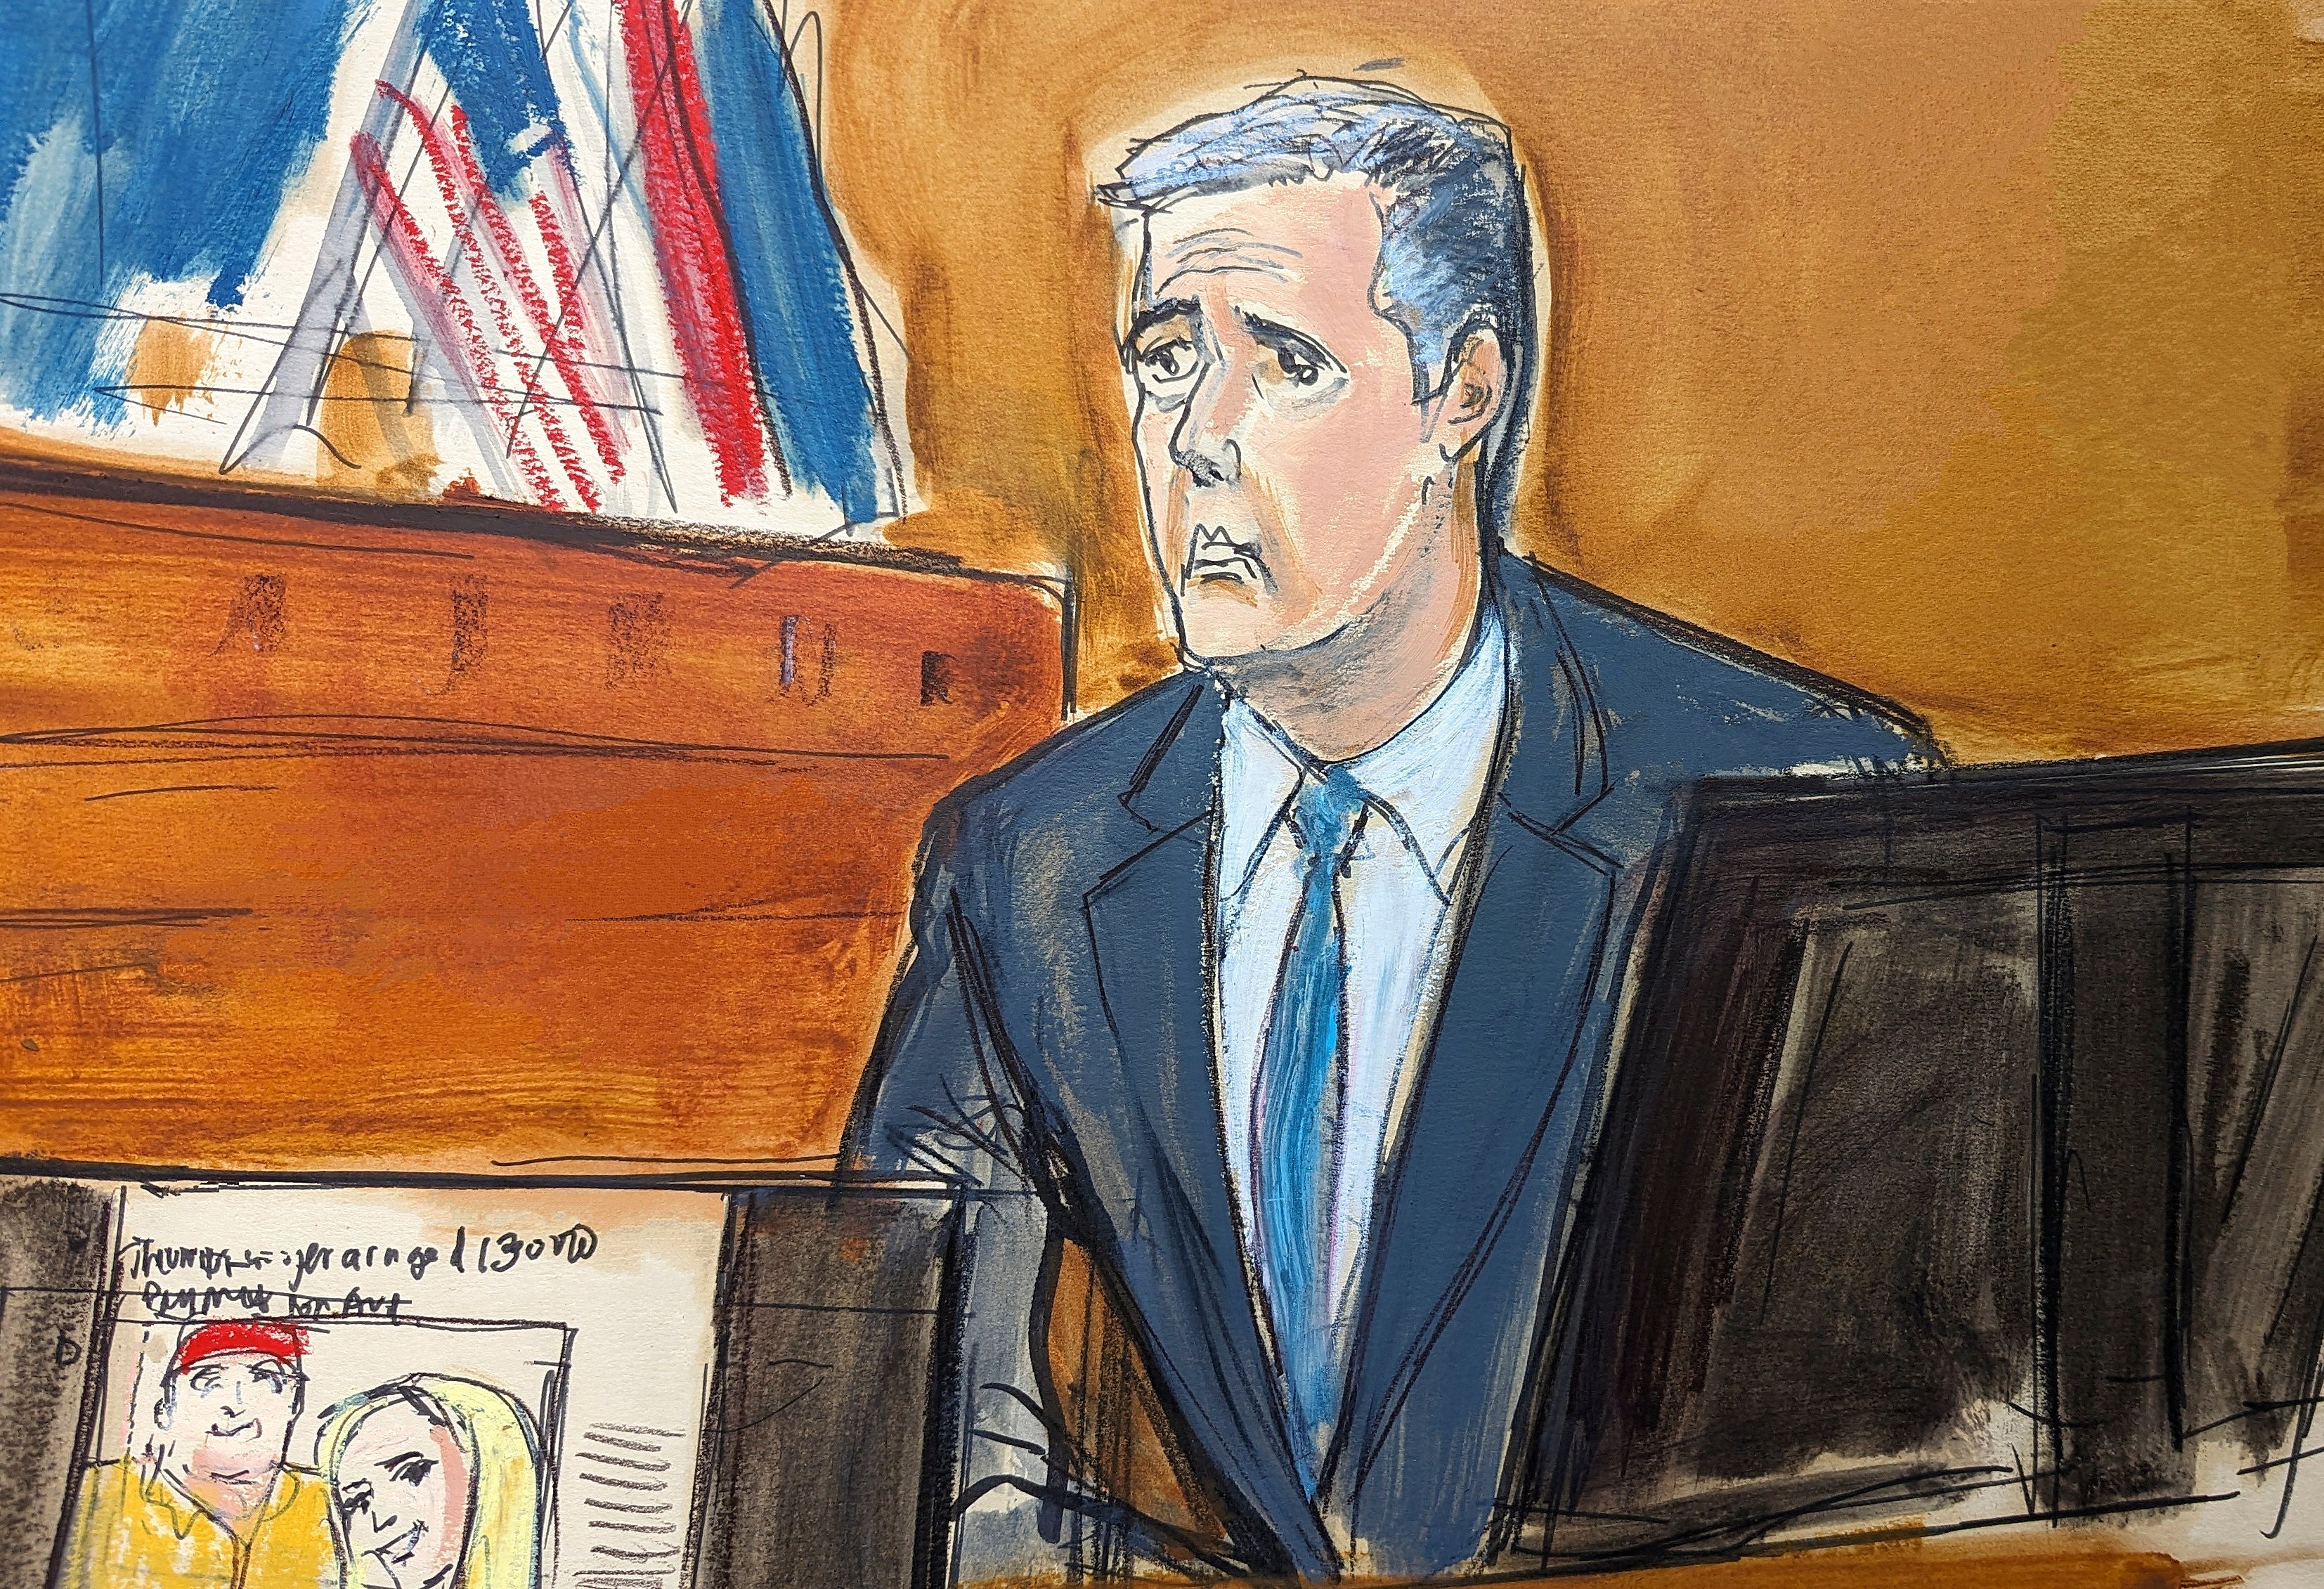 Another rather unflattering portrait of Cohen